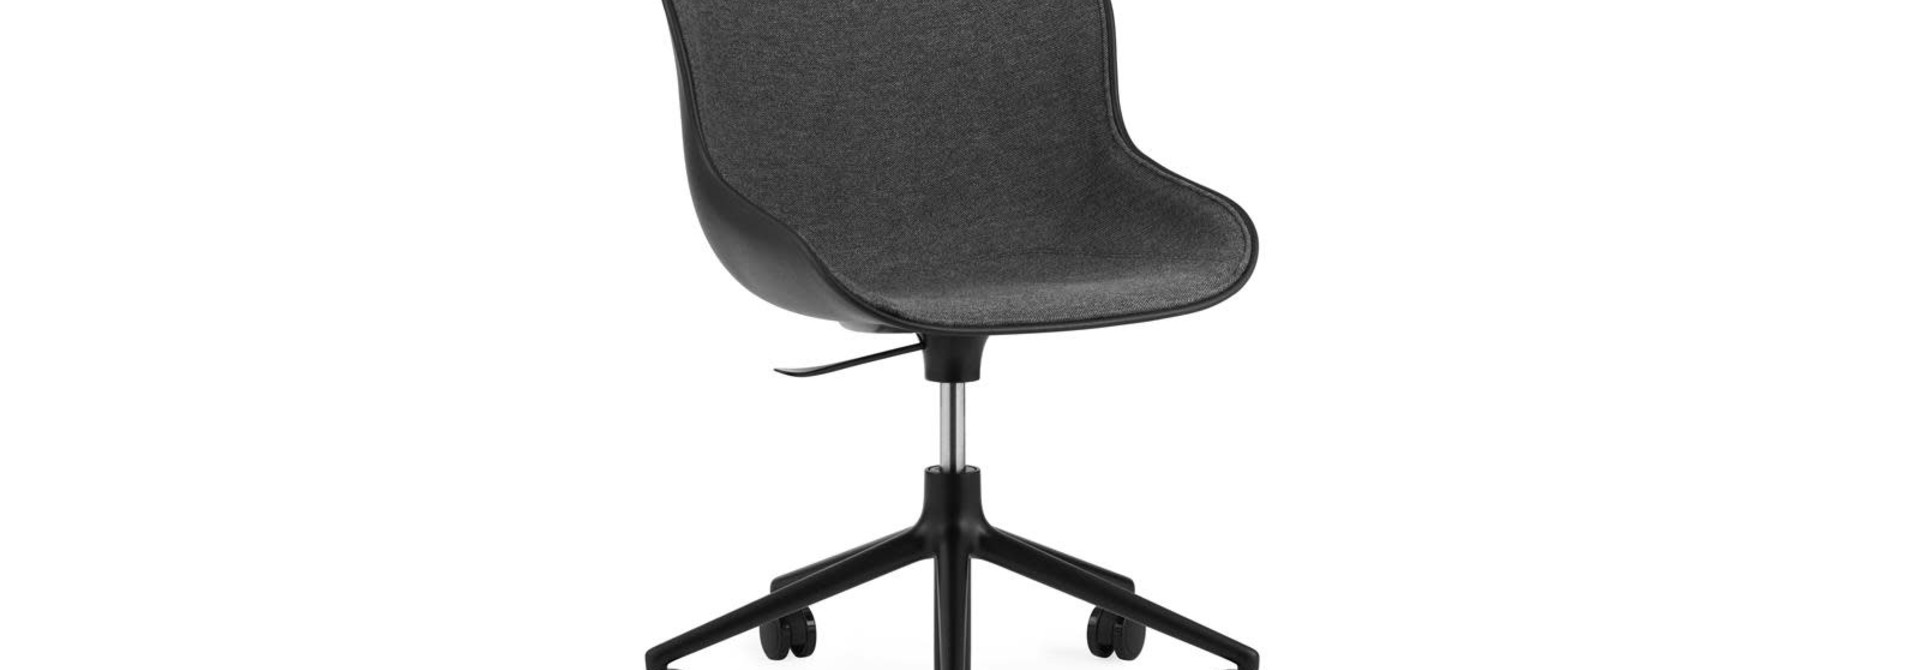 Hyg chair swivel with gaslift - Front upholstery